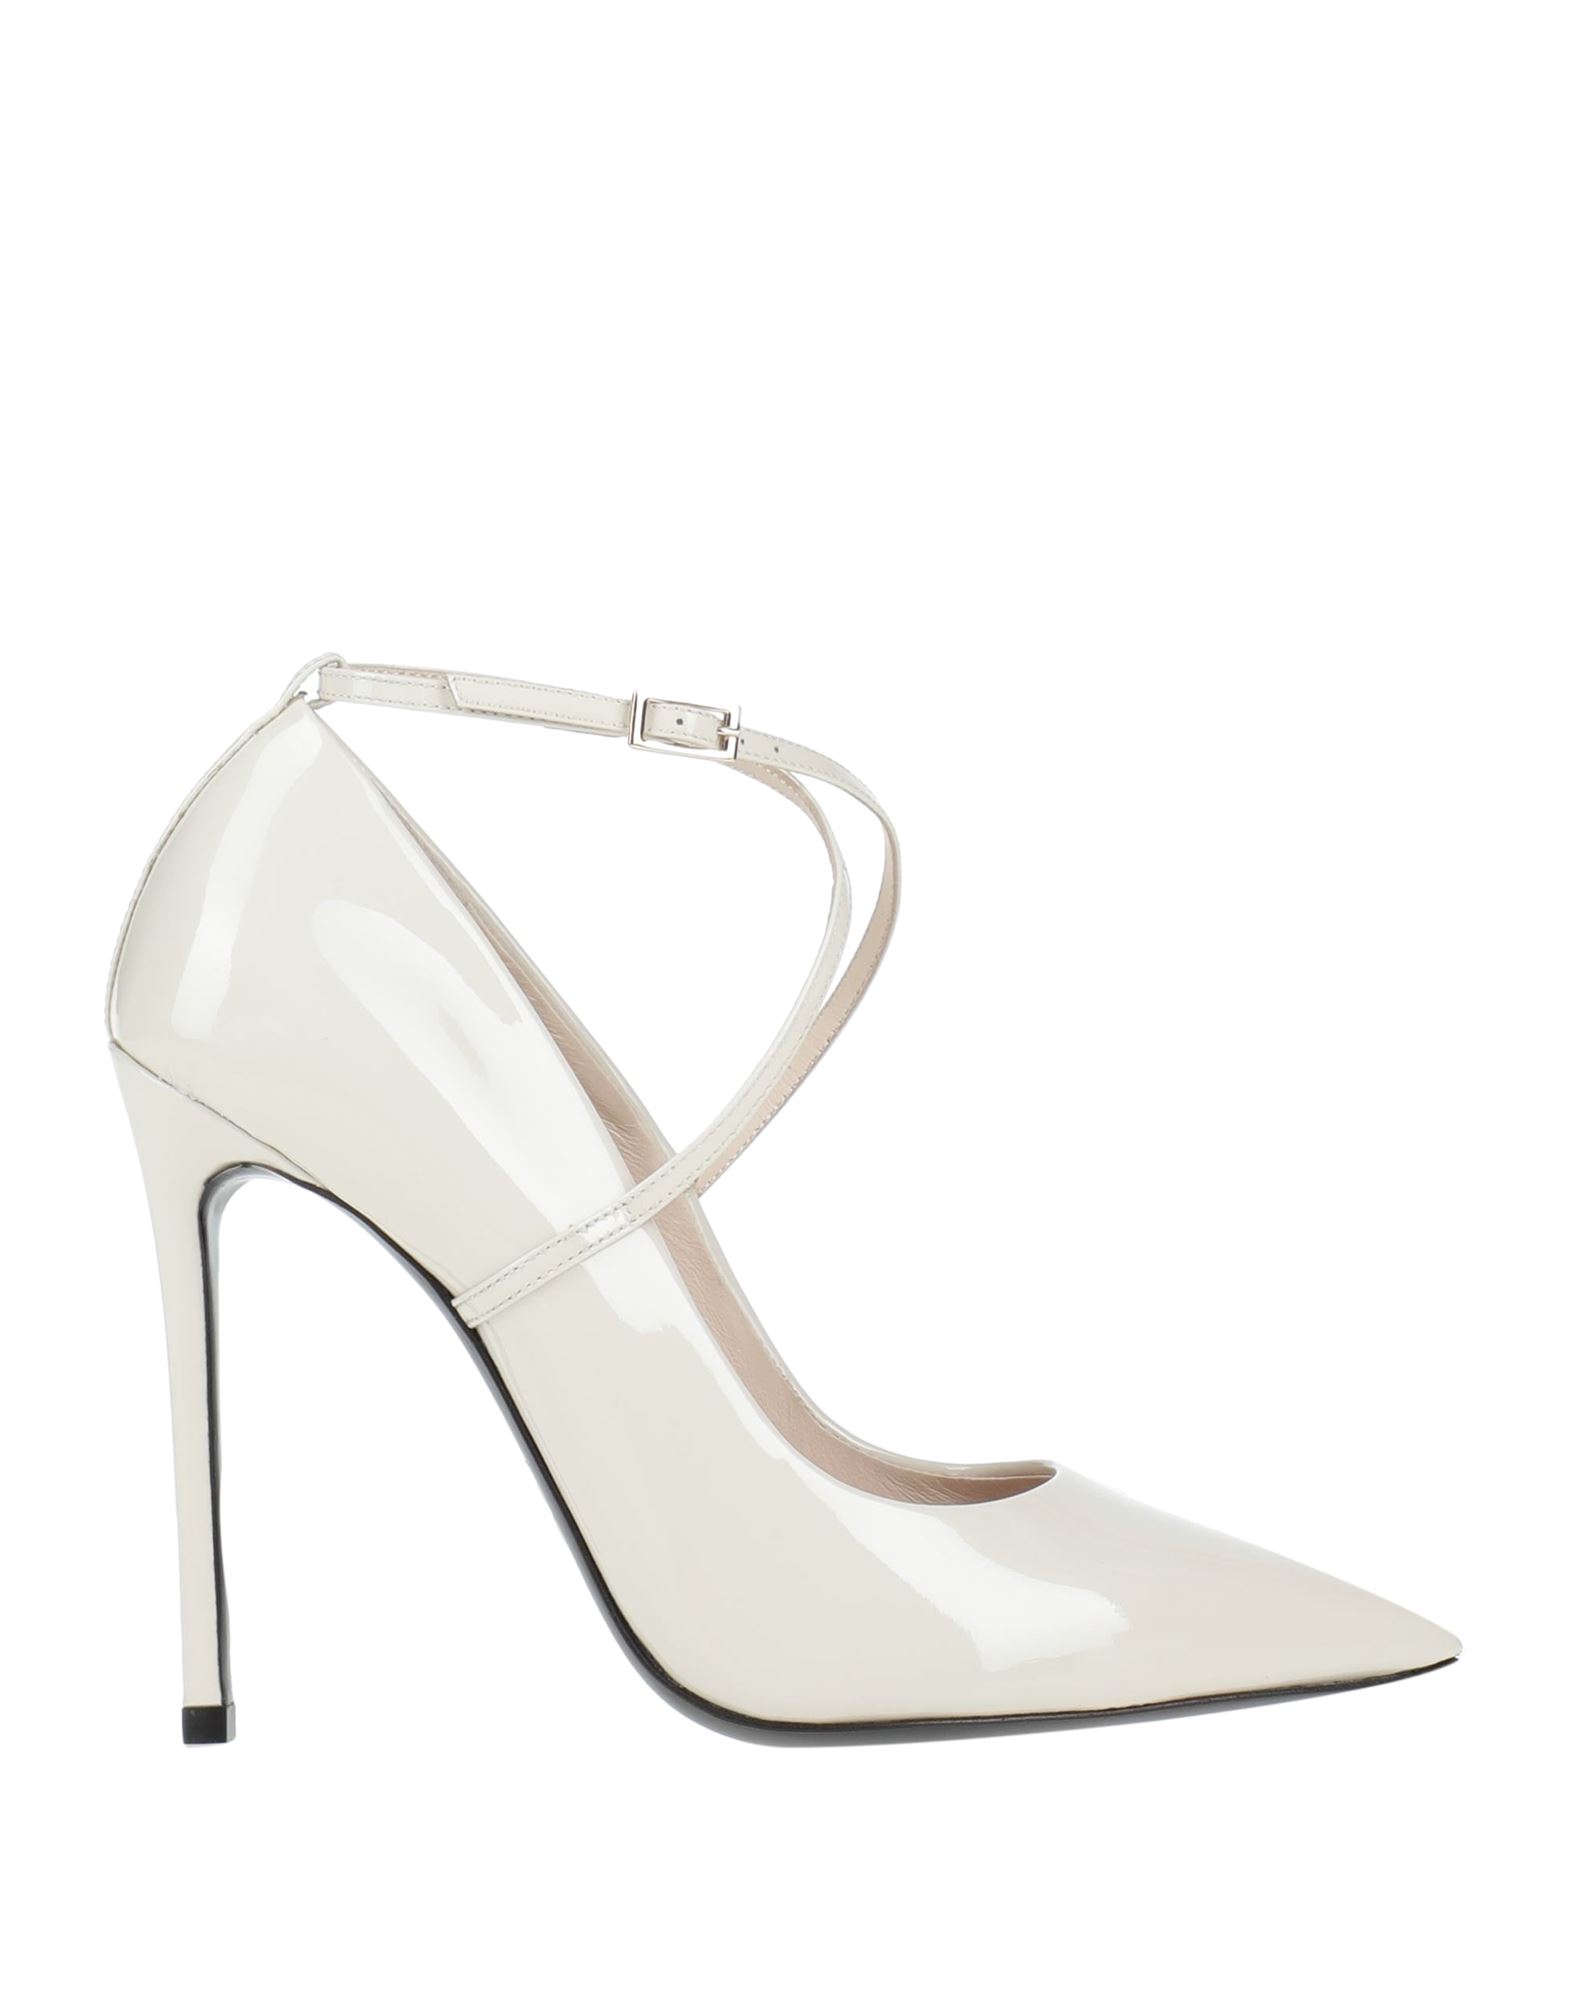 Greymer Pumps In Ivory